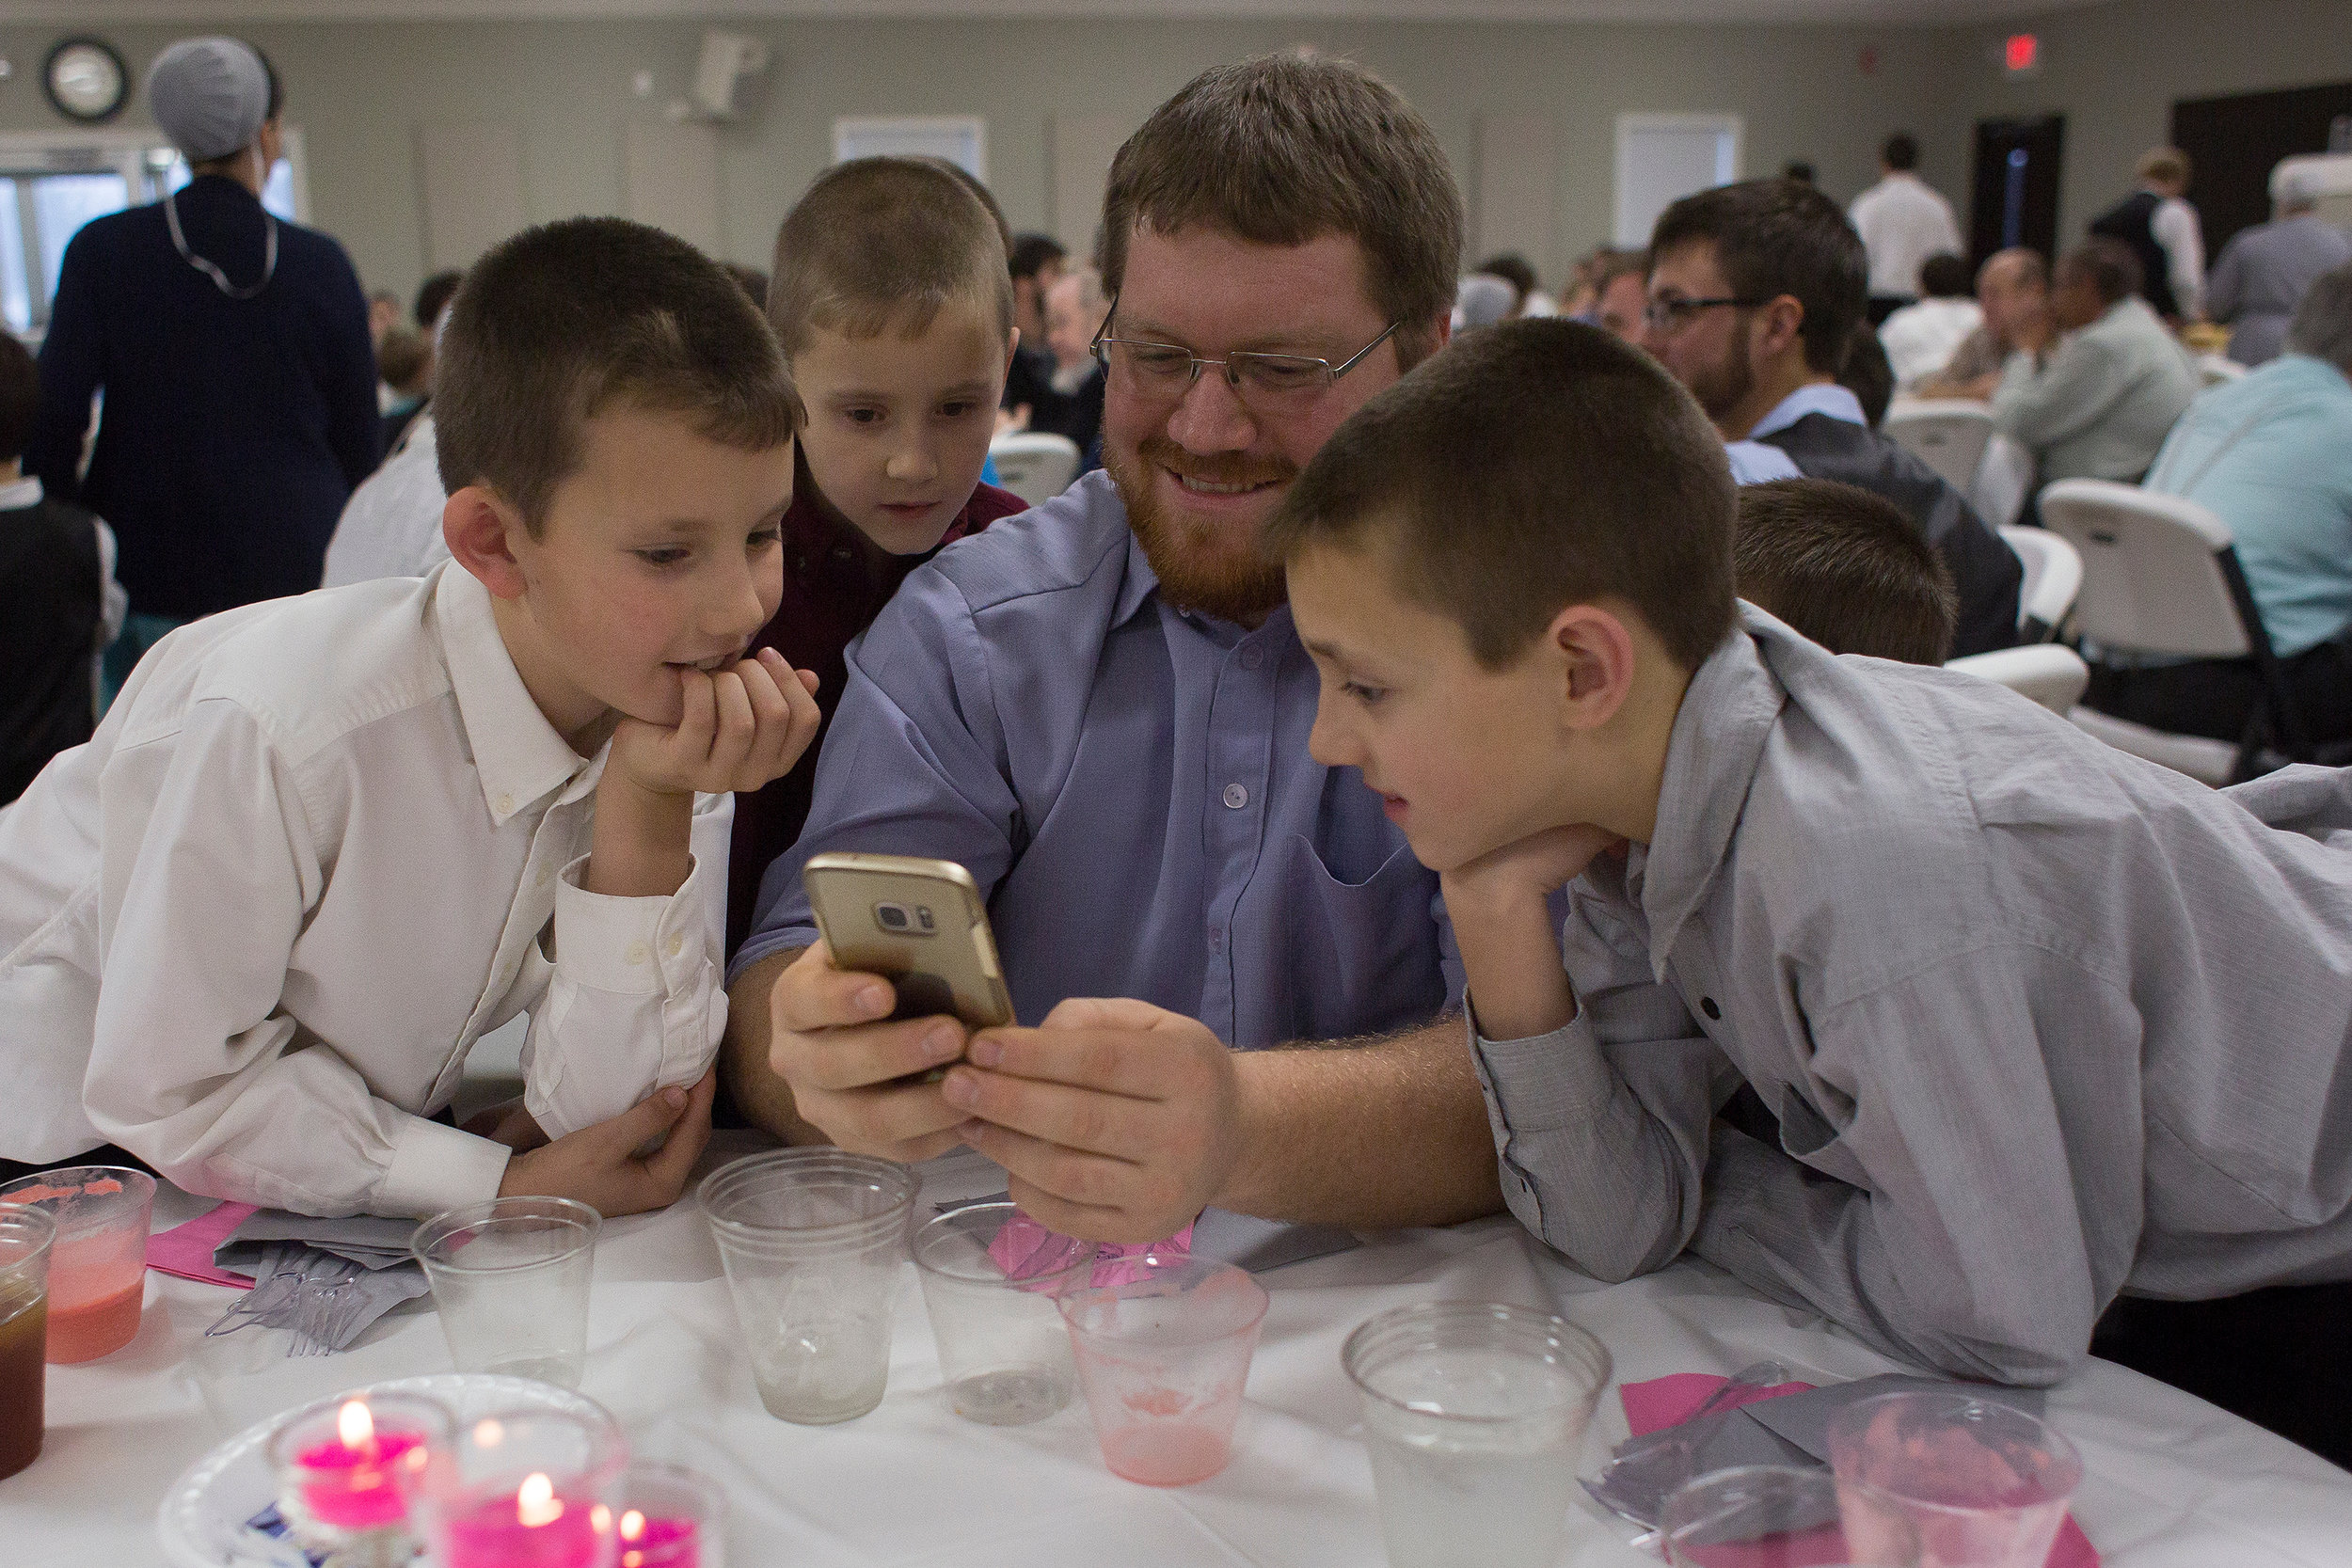  Jonathan Beachy of Flat Rock, Illinois, showed hunting videos to the Knepp children — Darius, Tyler, Zachary, and Cody — on his phone during a wedding reception Dec. 22 at Berea Mennonite Church in Cannelburg. The Knepps do not have a television or 